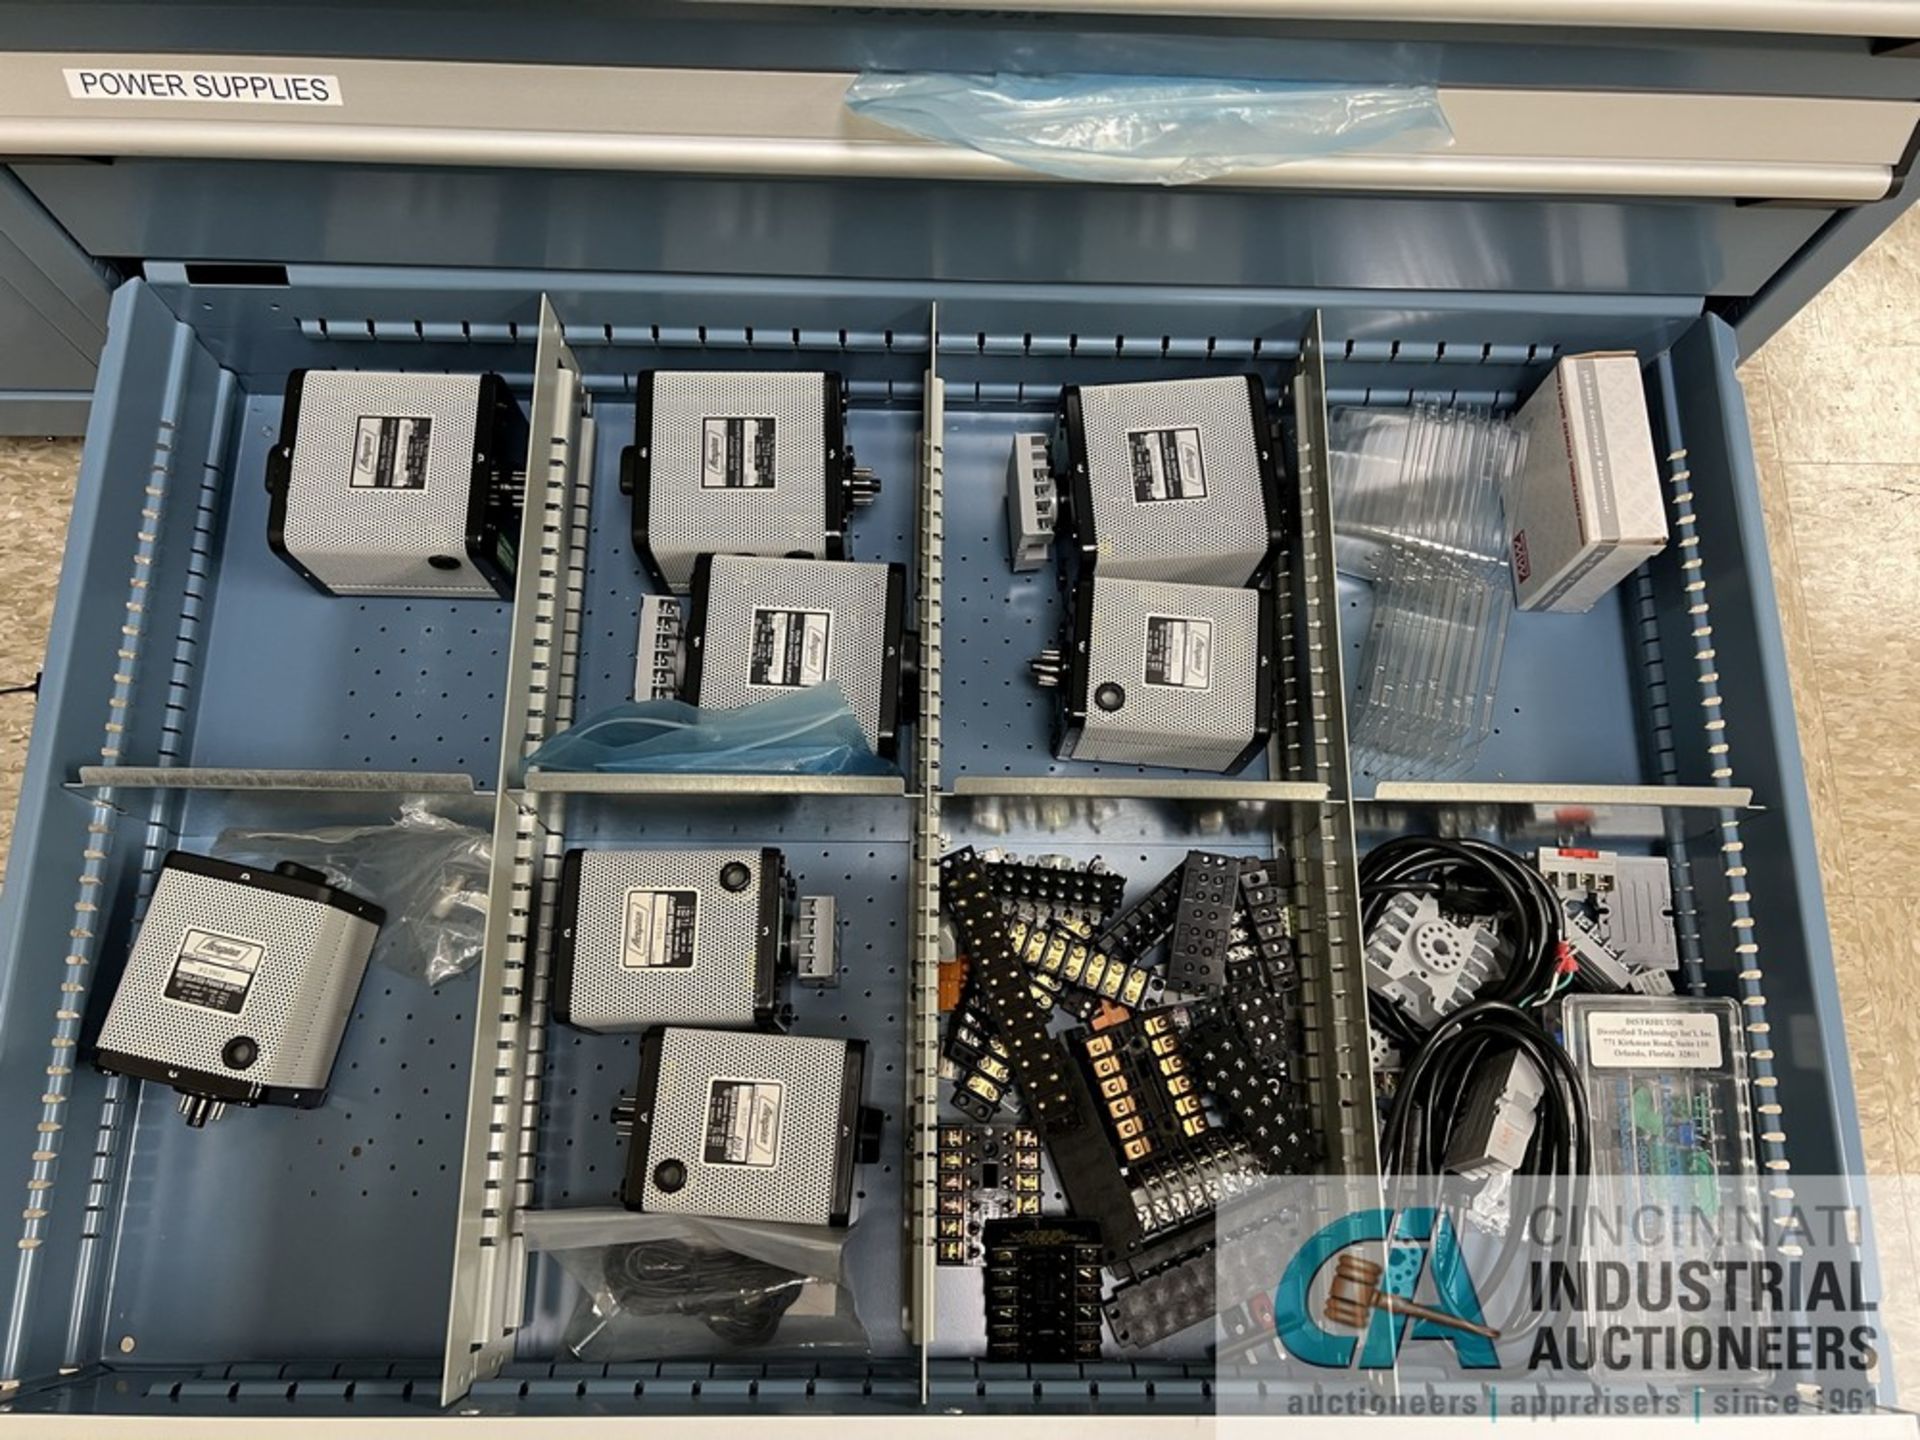 14-DRAWER ROUSSEAU PARTS CABINET WITH CONTENTS INCLUDING WIRING, CONNECTORS, SOLENOIDS, MOTORS, - Image 15 of 15